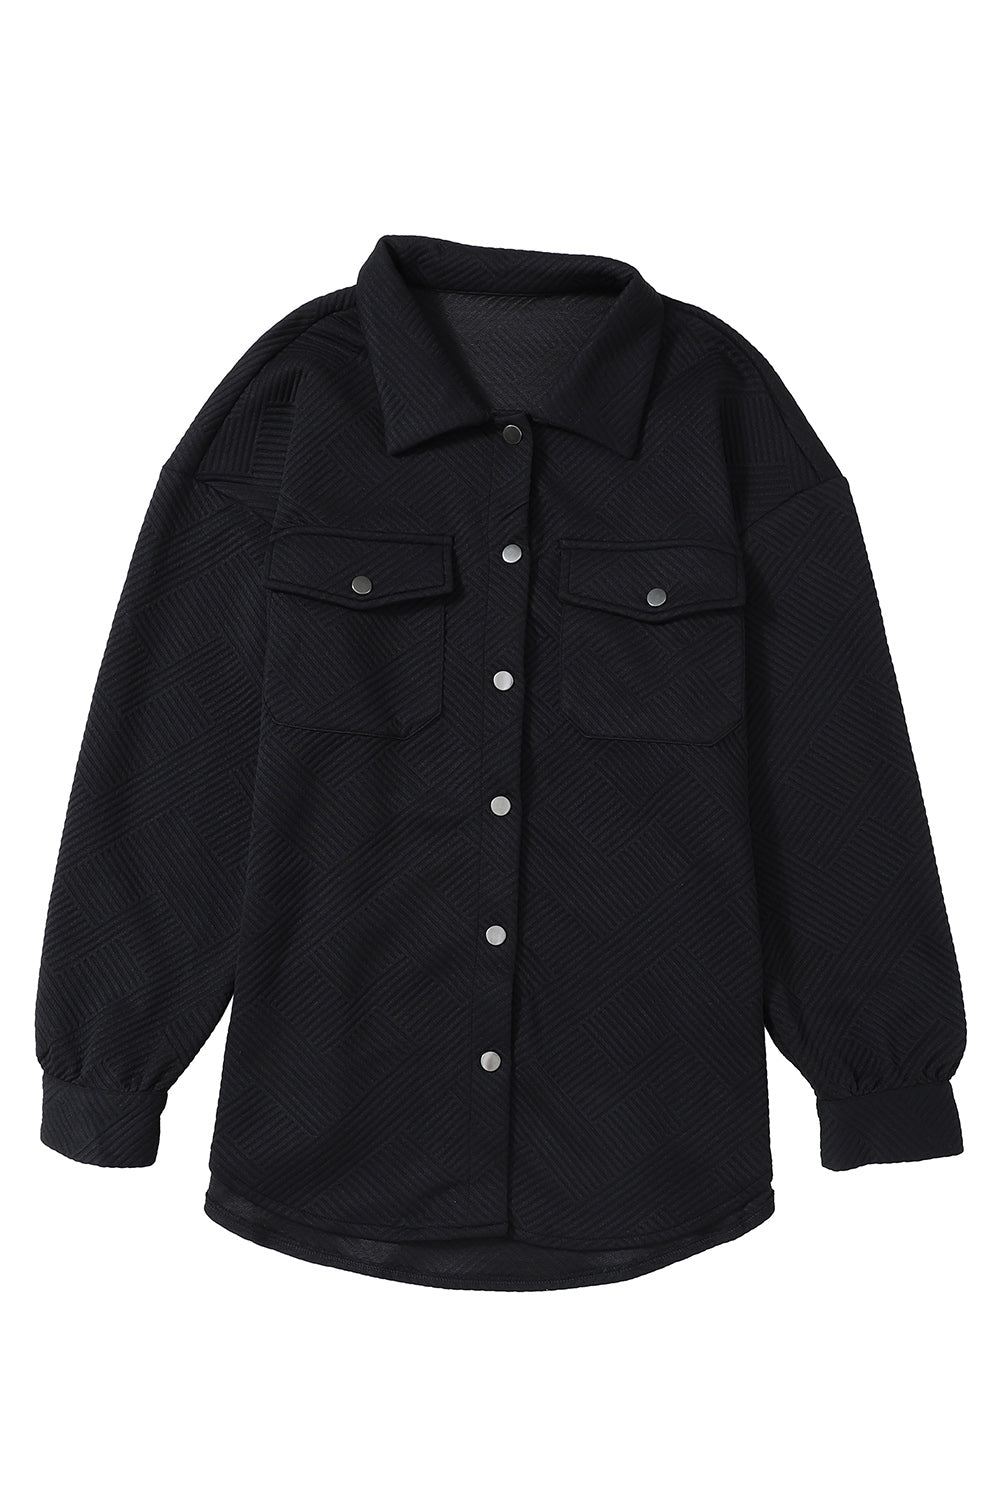 Black Solid Textured Flap Pocket Buttoned Shacket